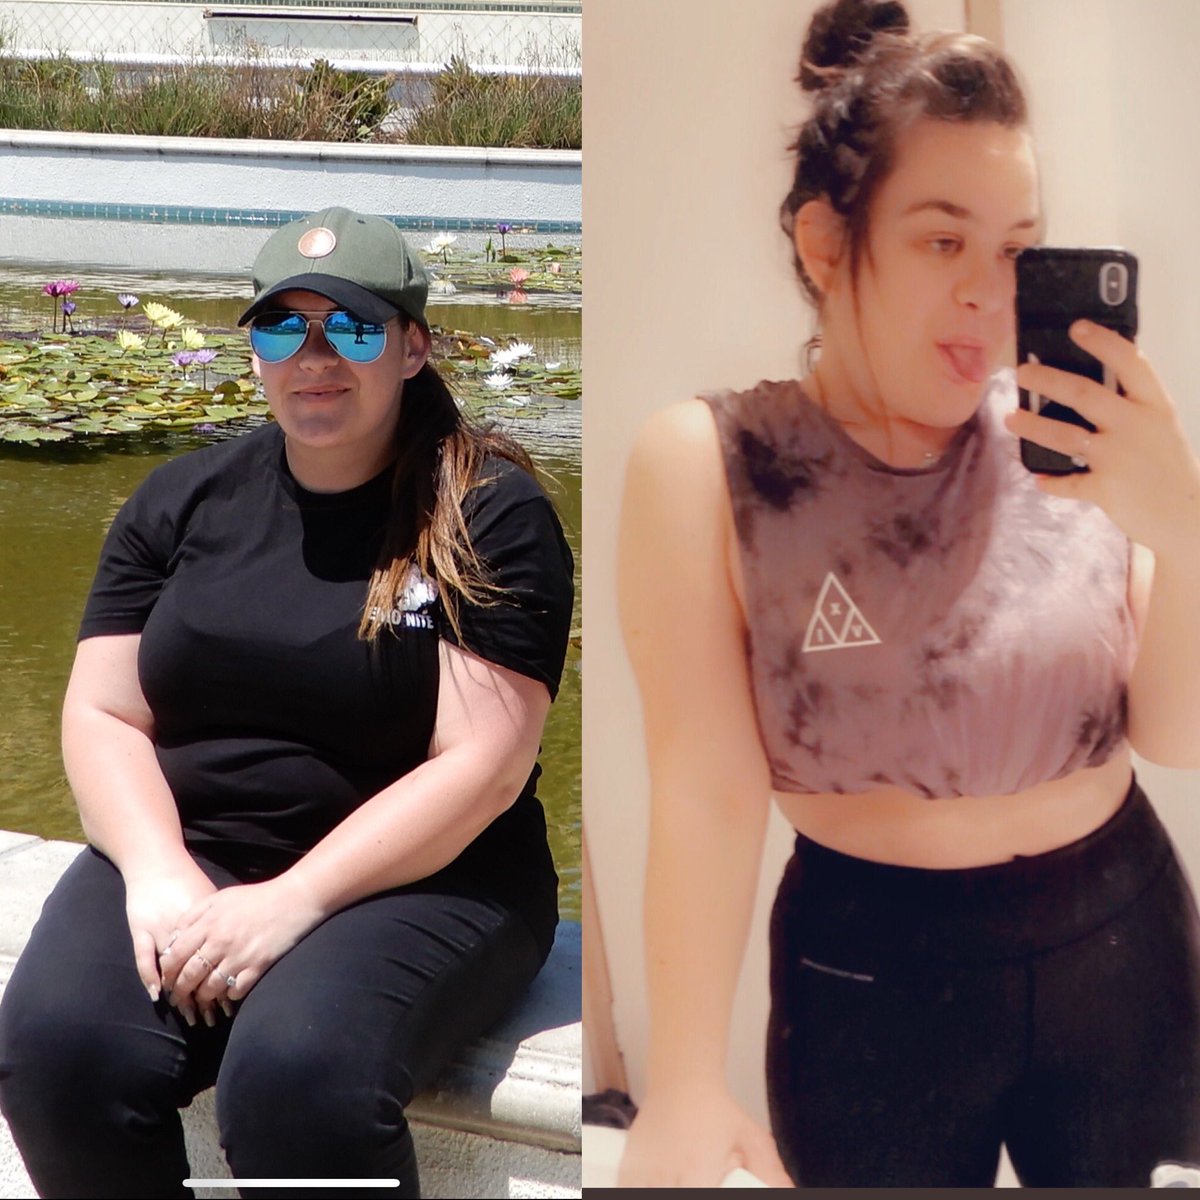 I get a lot of curious people sending questions about my weightloss journey, how I’ve been doing it and how I’m continuing to maintain it over quarantine... so here’s some (non-professional and completely my own opinion based on my experience) answers